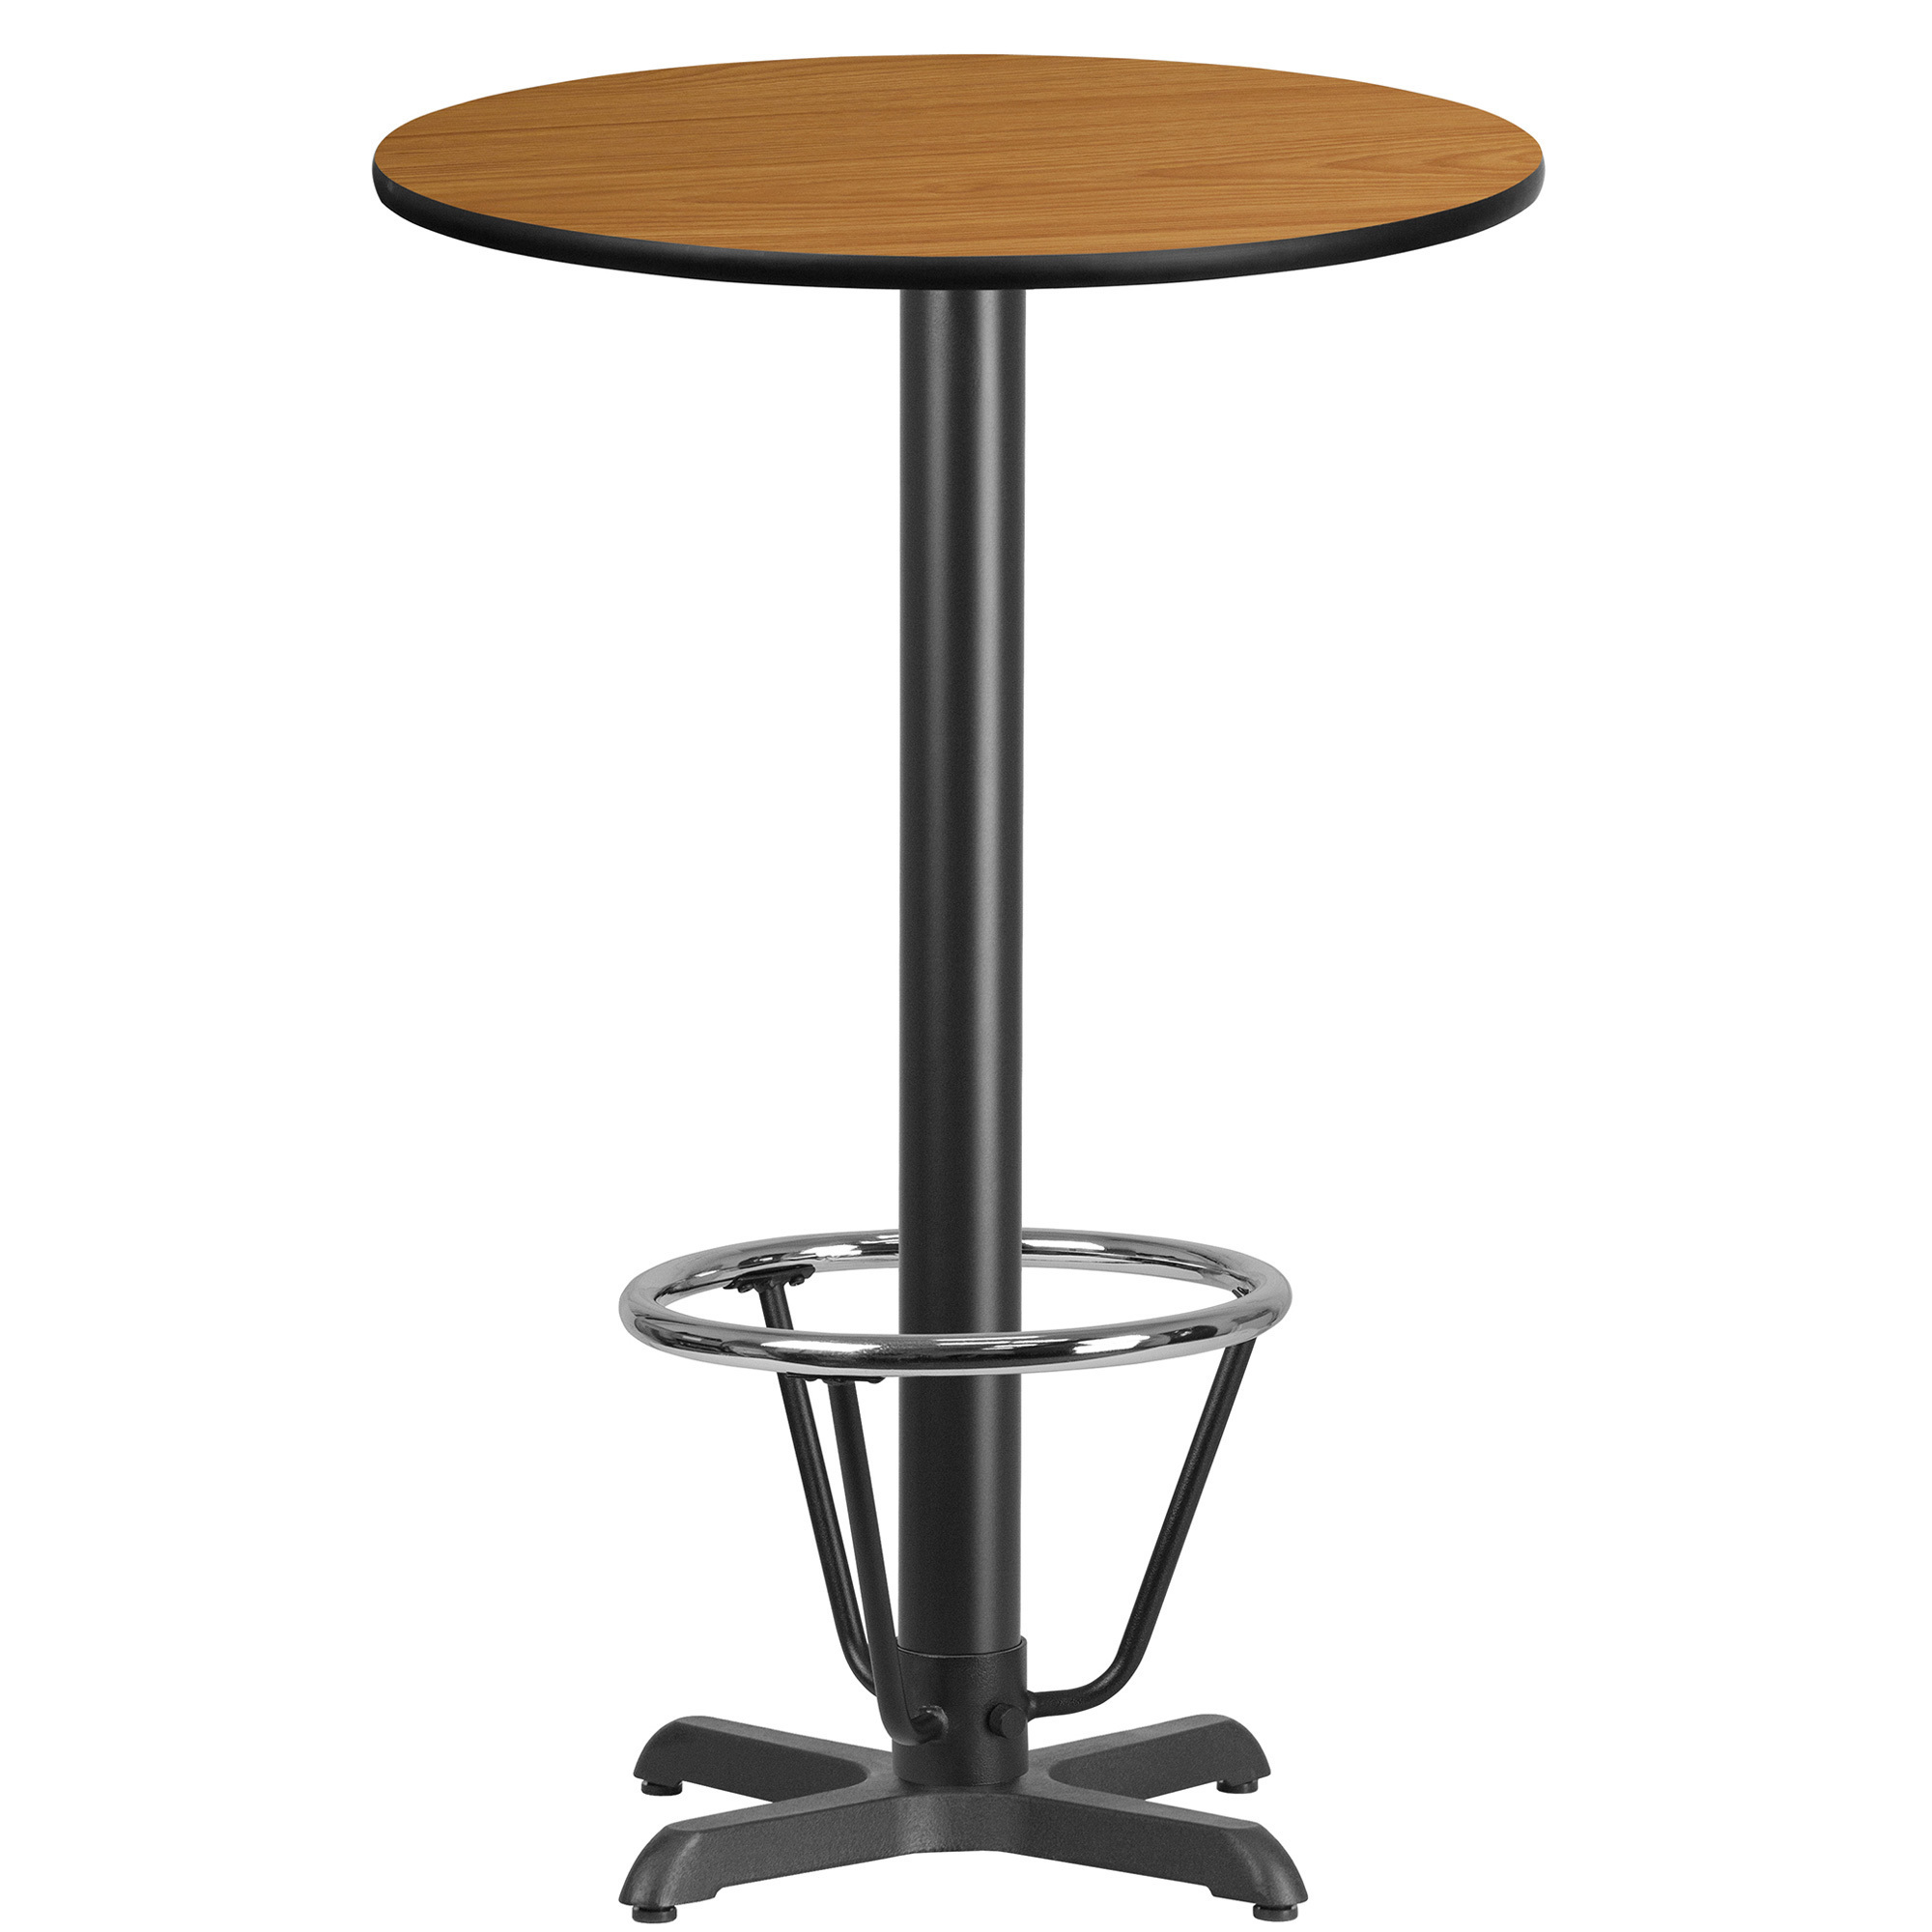 Flash Furniture 24Inch Round Bar Height Metal Table with X-Base â Natural/Walnut Reversible Laminate Top, Model XURD24NTT22B3F